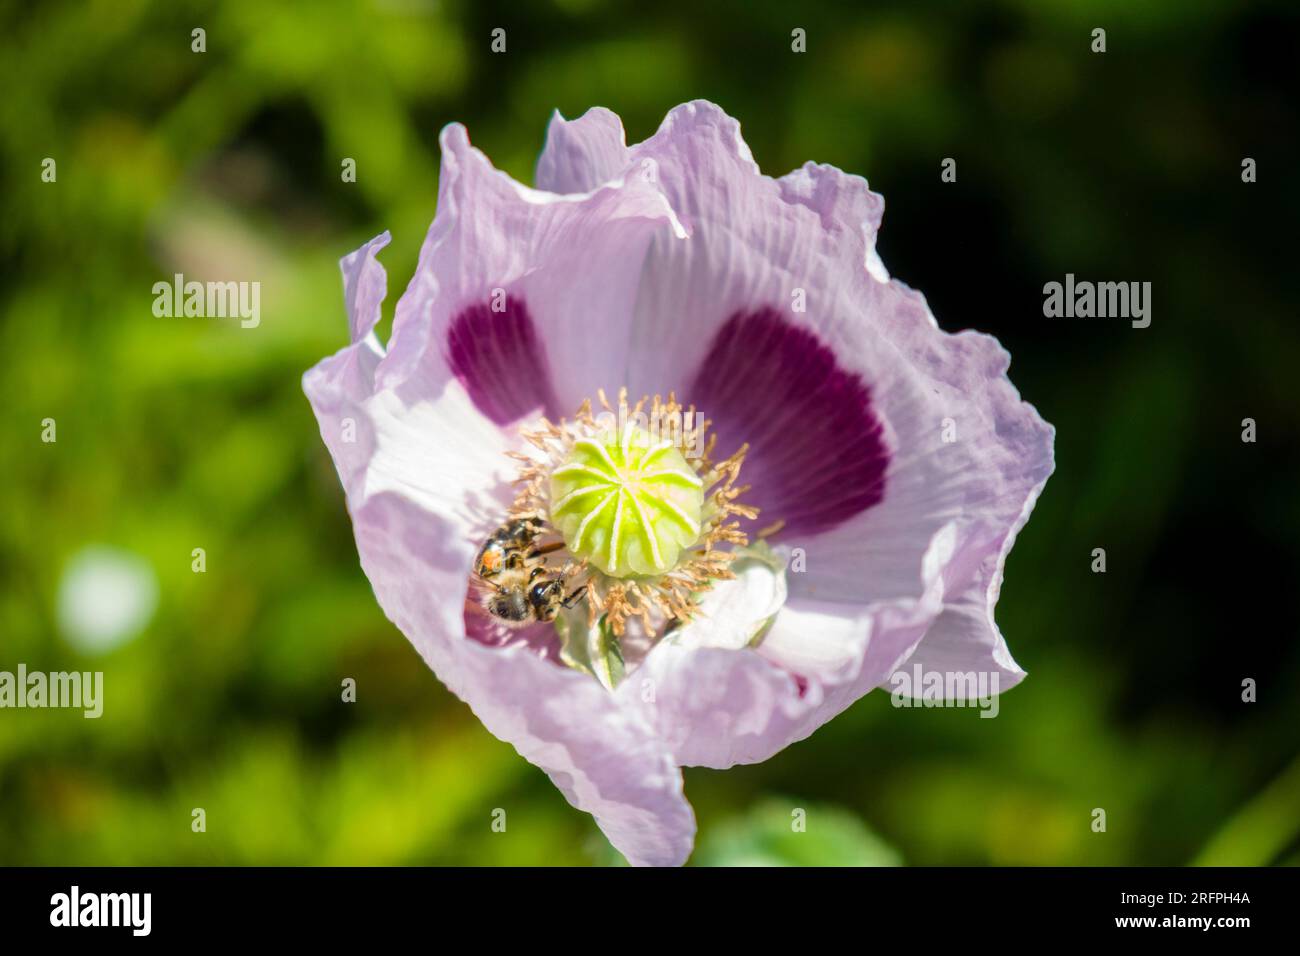 A Carniolan honey bee (Apis mellifera carnica) collecting nectar on an Oriental poppy (Papaver orientale) blossom. Stock Photo